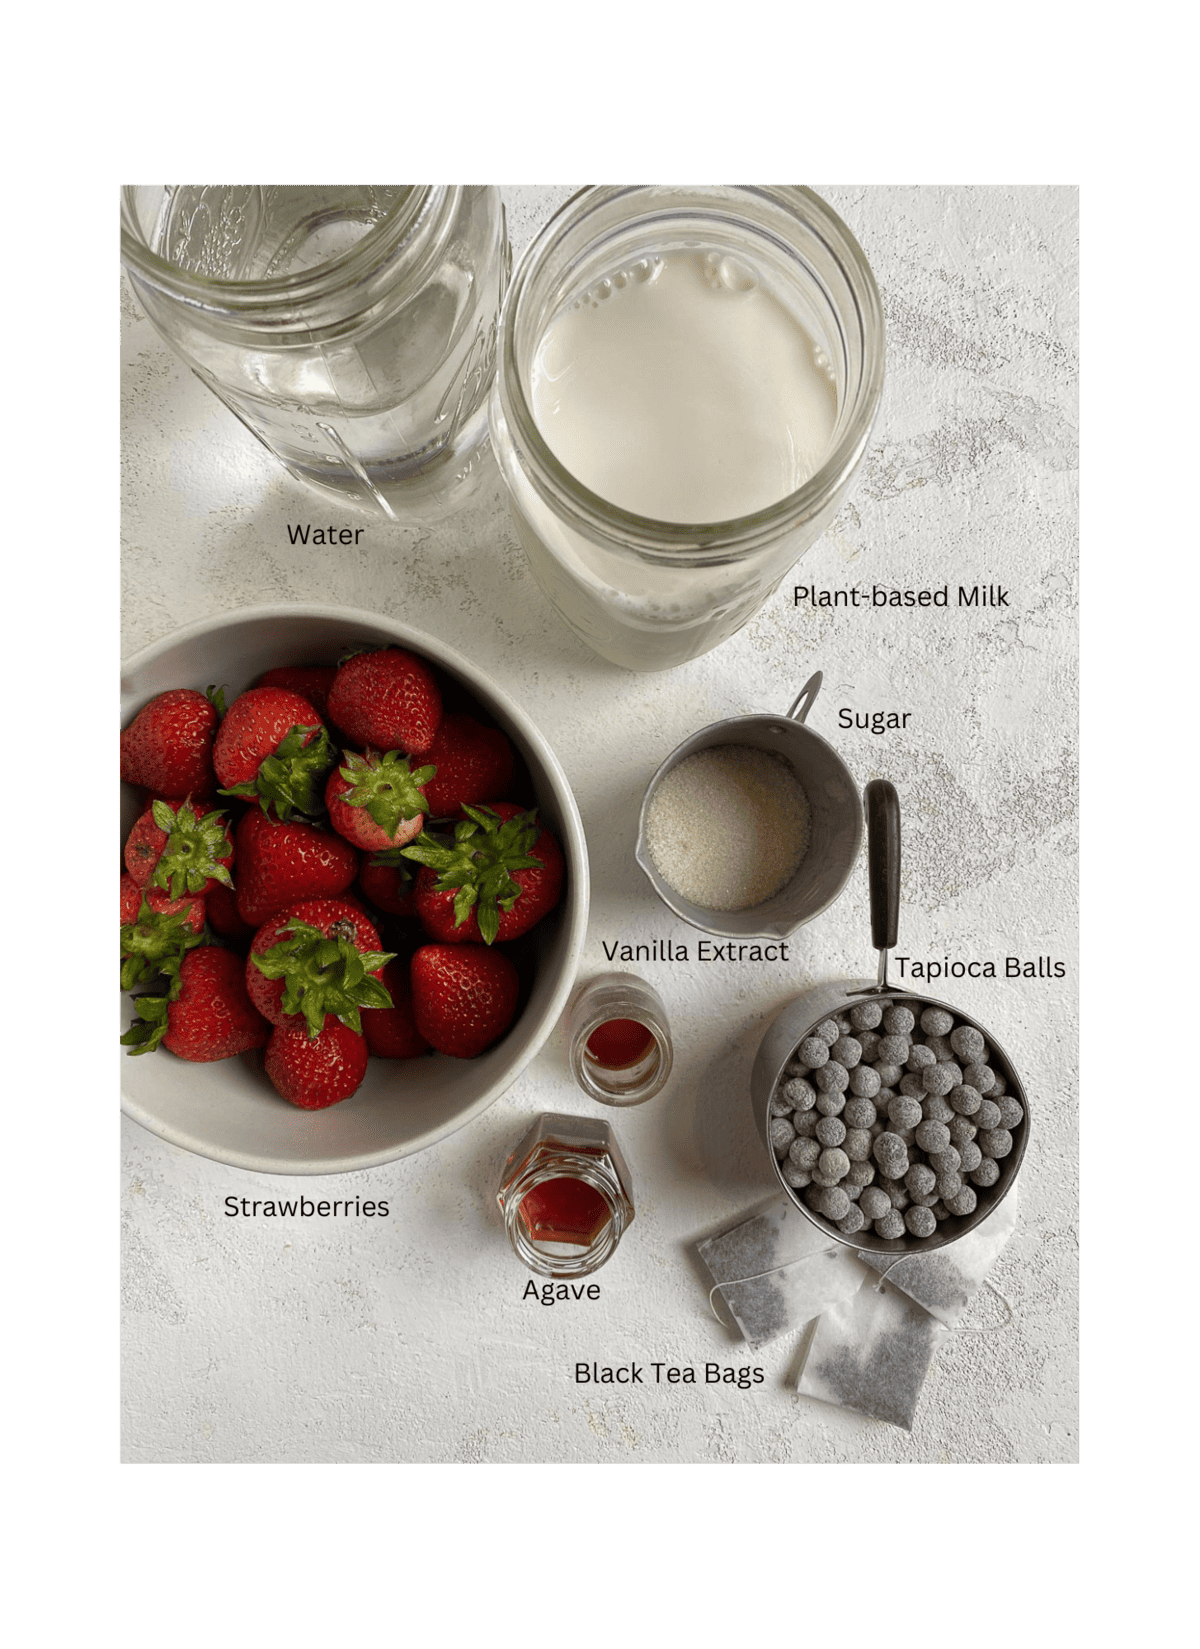 ingredients for Strawberry Boba Tea on a white surface